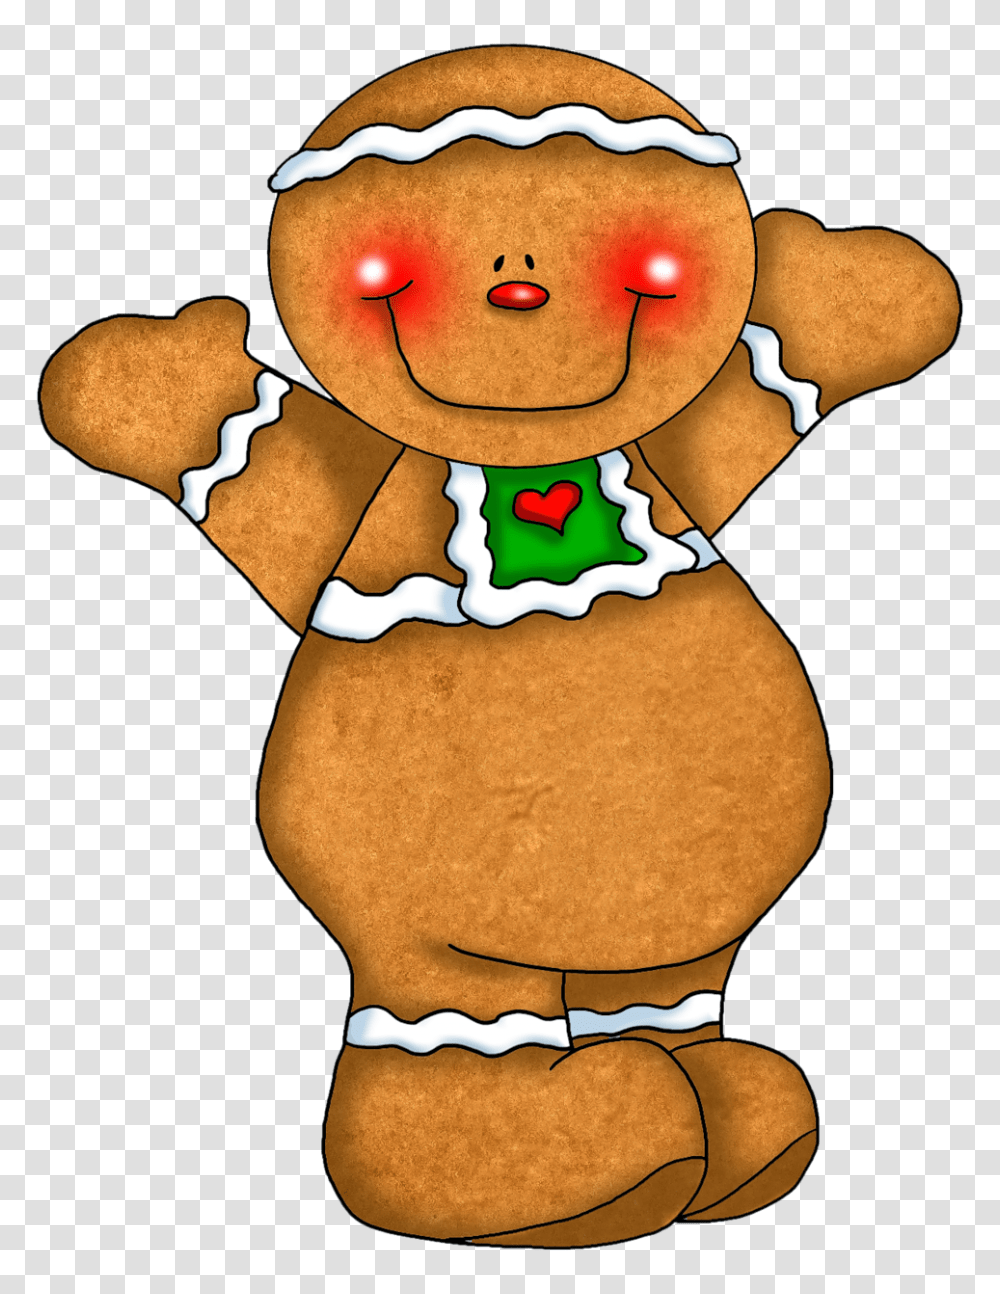 Gingerbread Man Clip Art Free Clipart Images, Cookie, Food, Biscuit, Toy Transparent Png